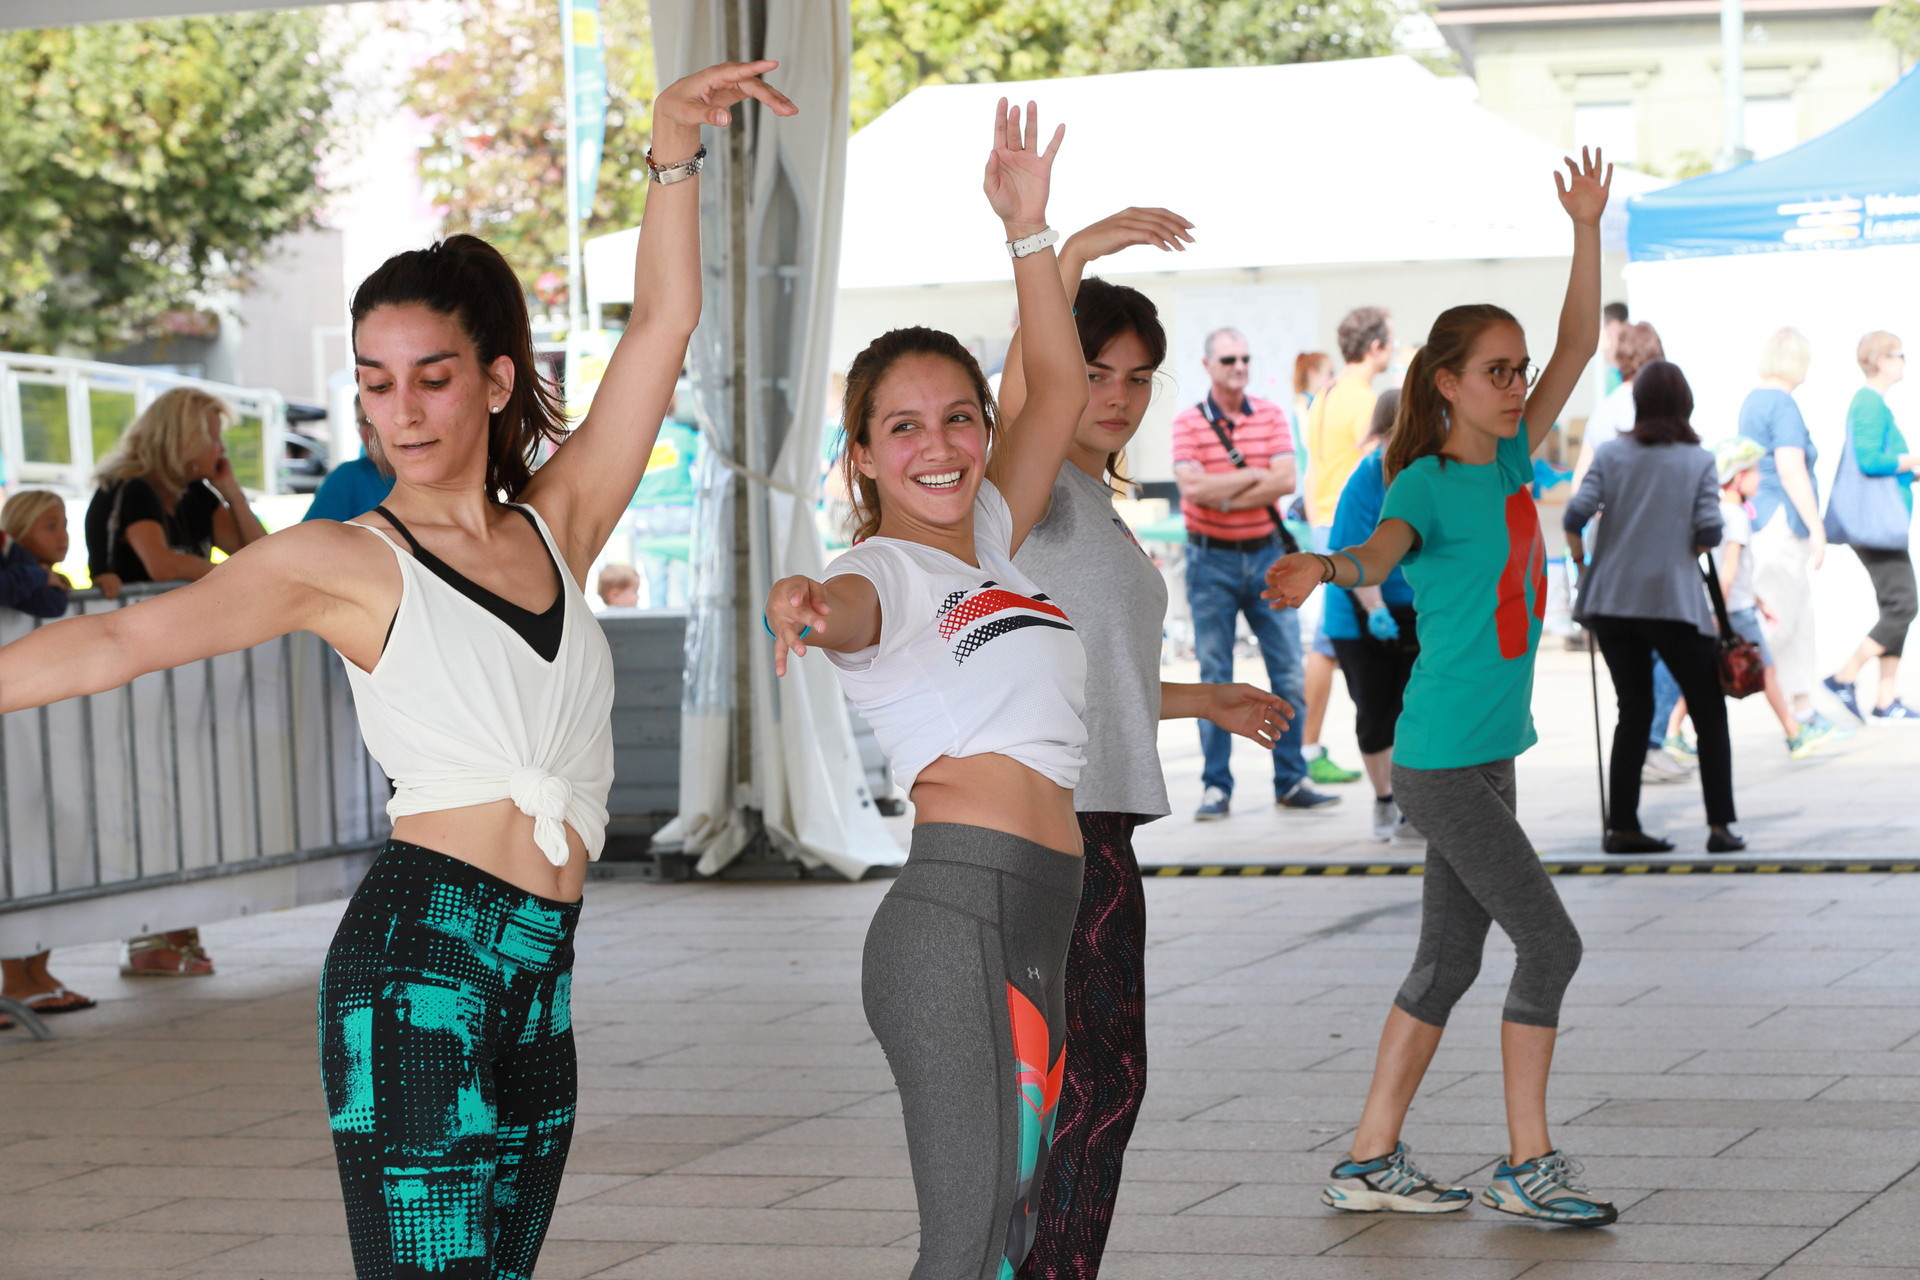 FISU launched its Healthy Campus project in May in a bid to help students remain active while universities were closed owing to the coronavirus pandemic ©FISU